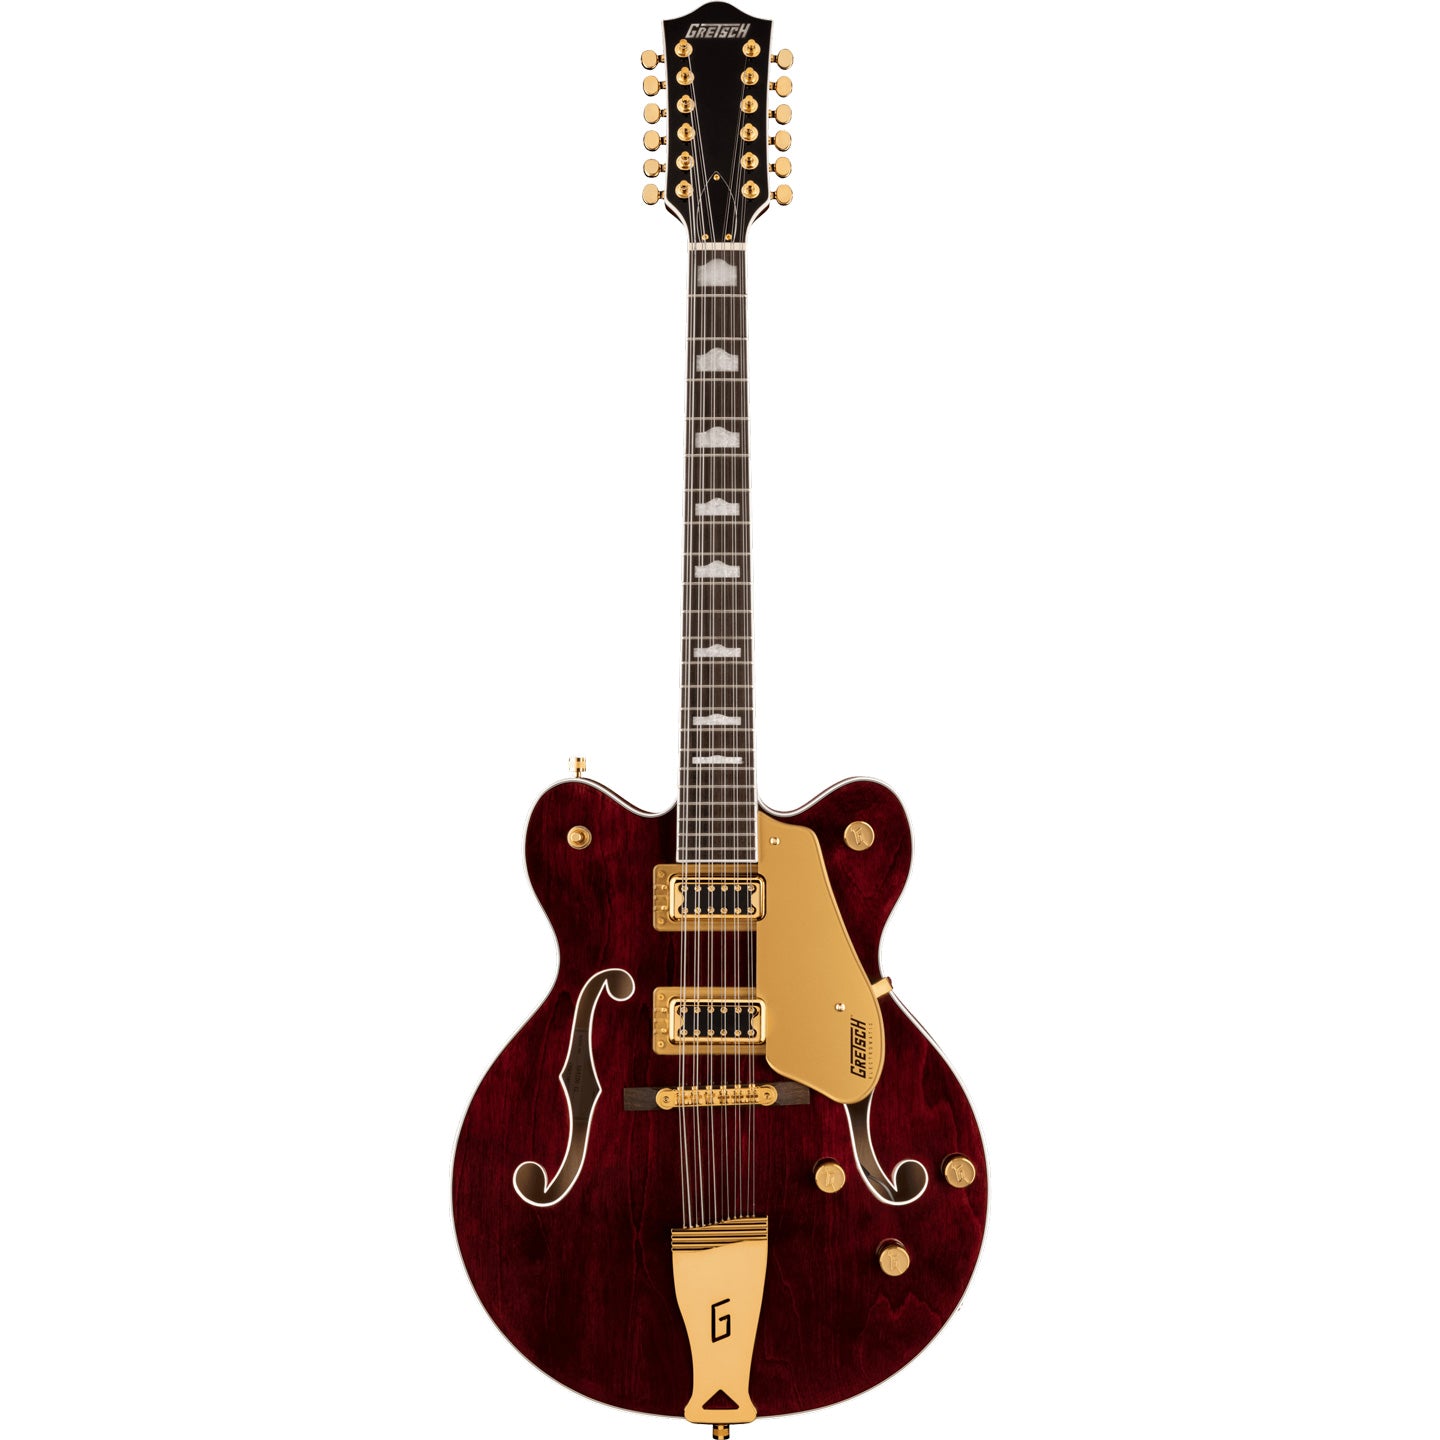 Gretsch G5422G-12 Electromatic Classic Double-Cut12-String Walnut Stain